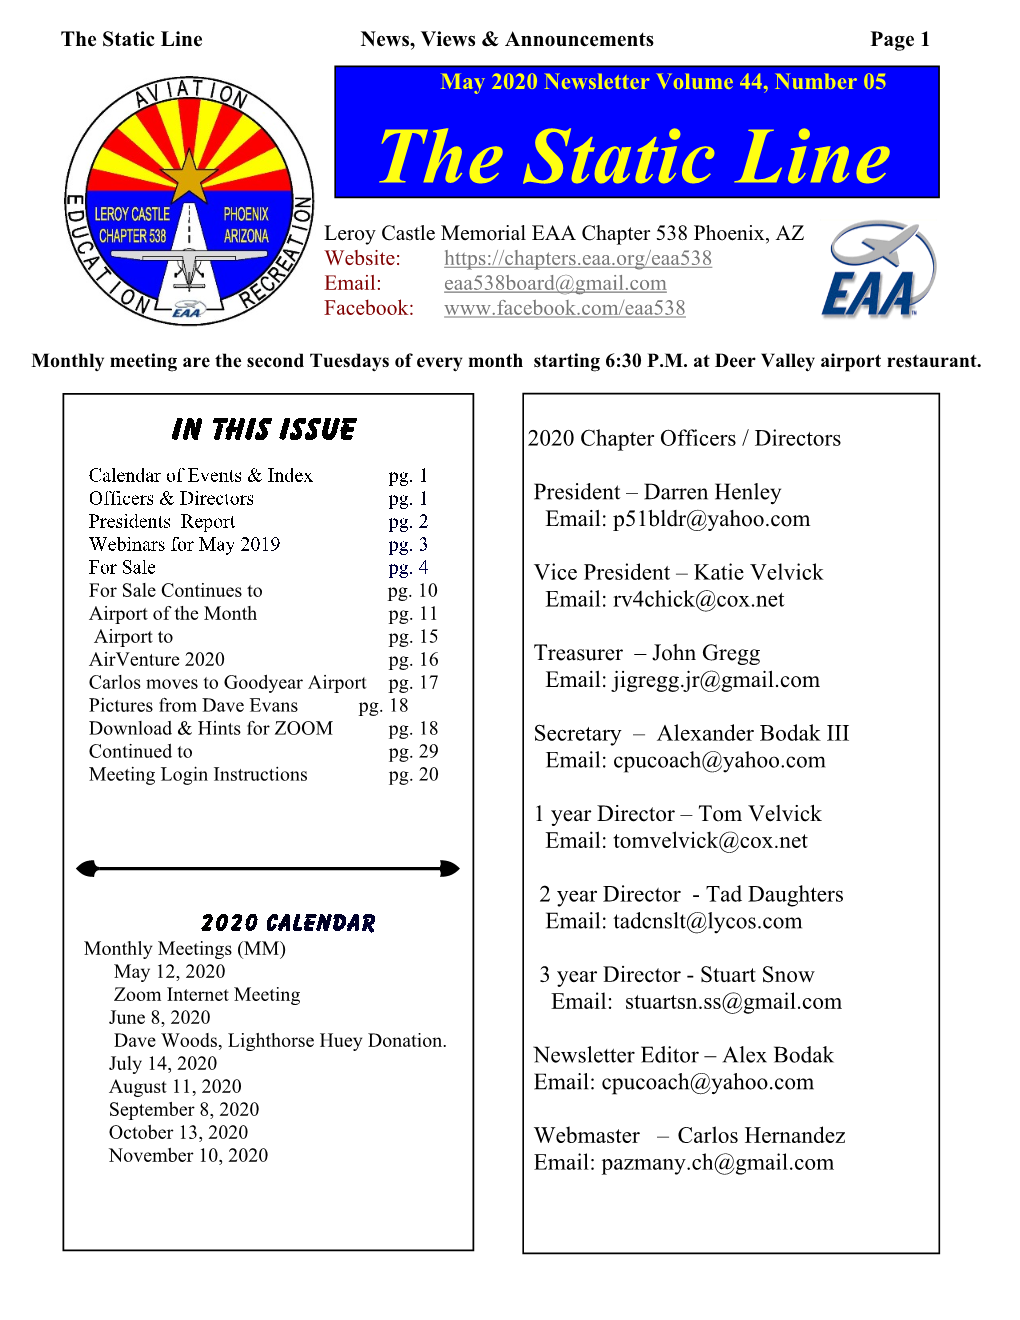 The Static Line News, Views & Announcements Page 1 May 2020 Newsletter Volume 44, Number 05 the Static Line